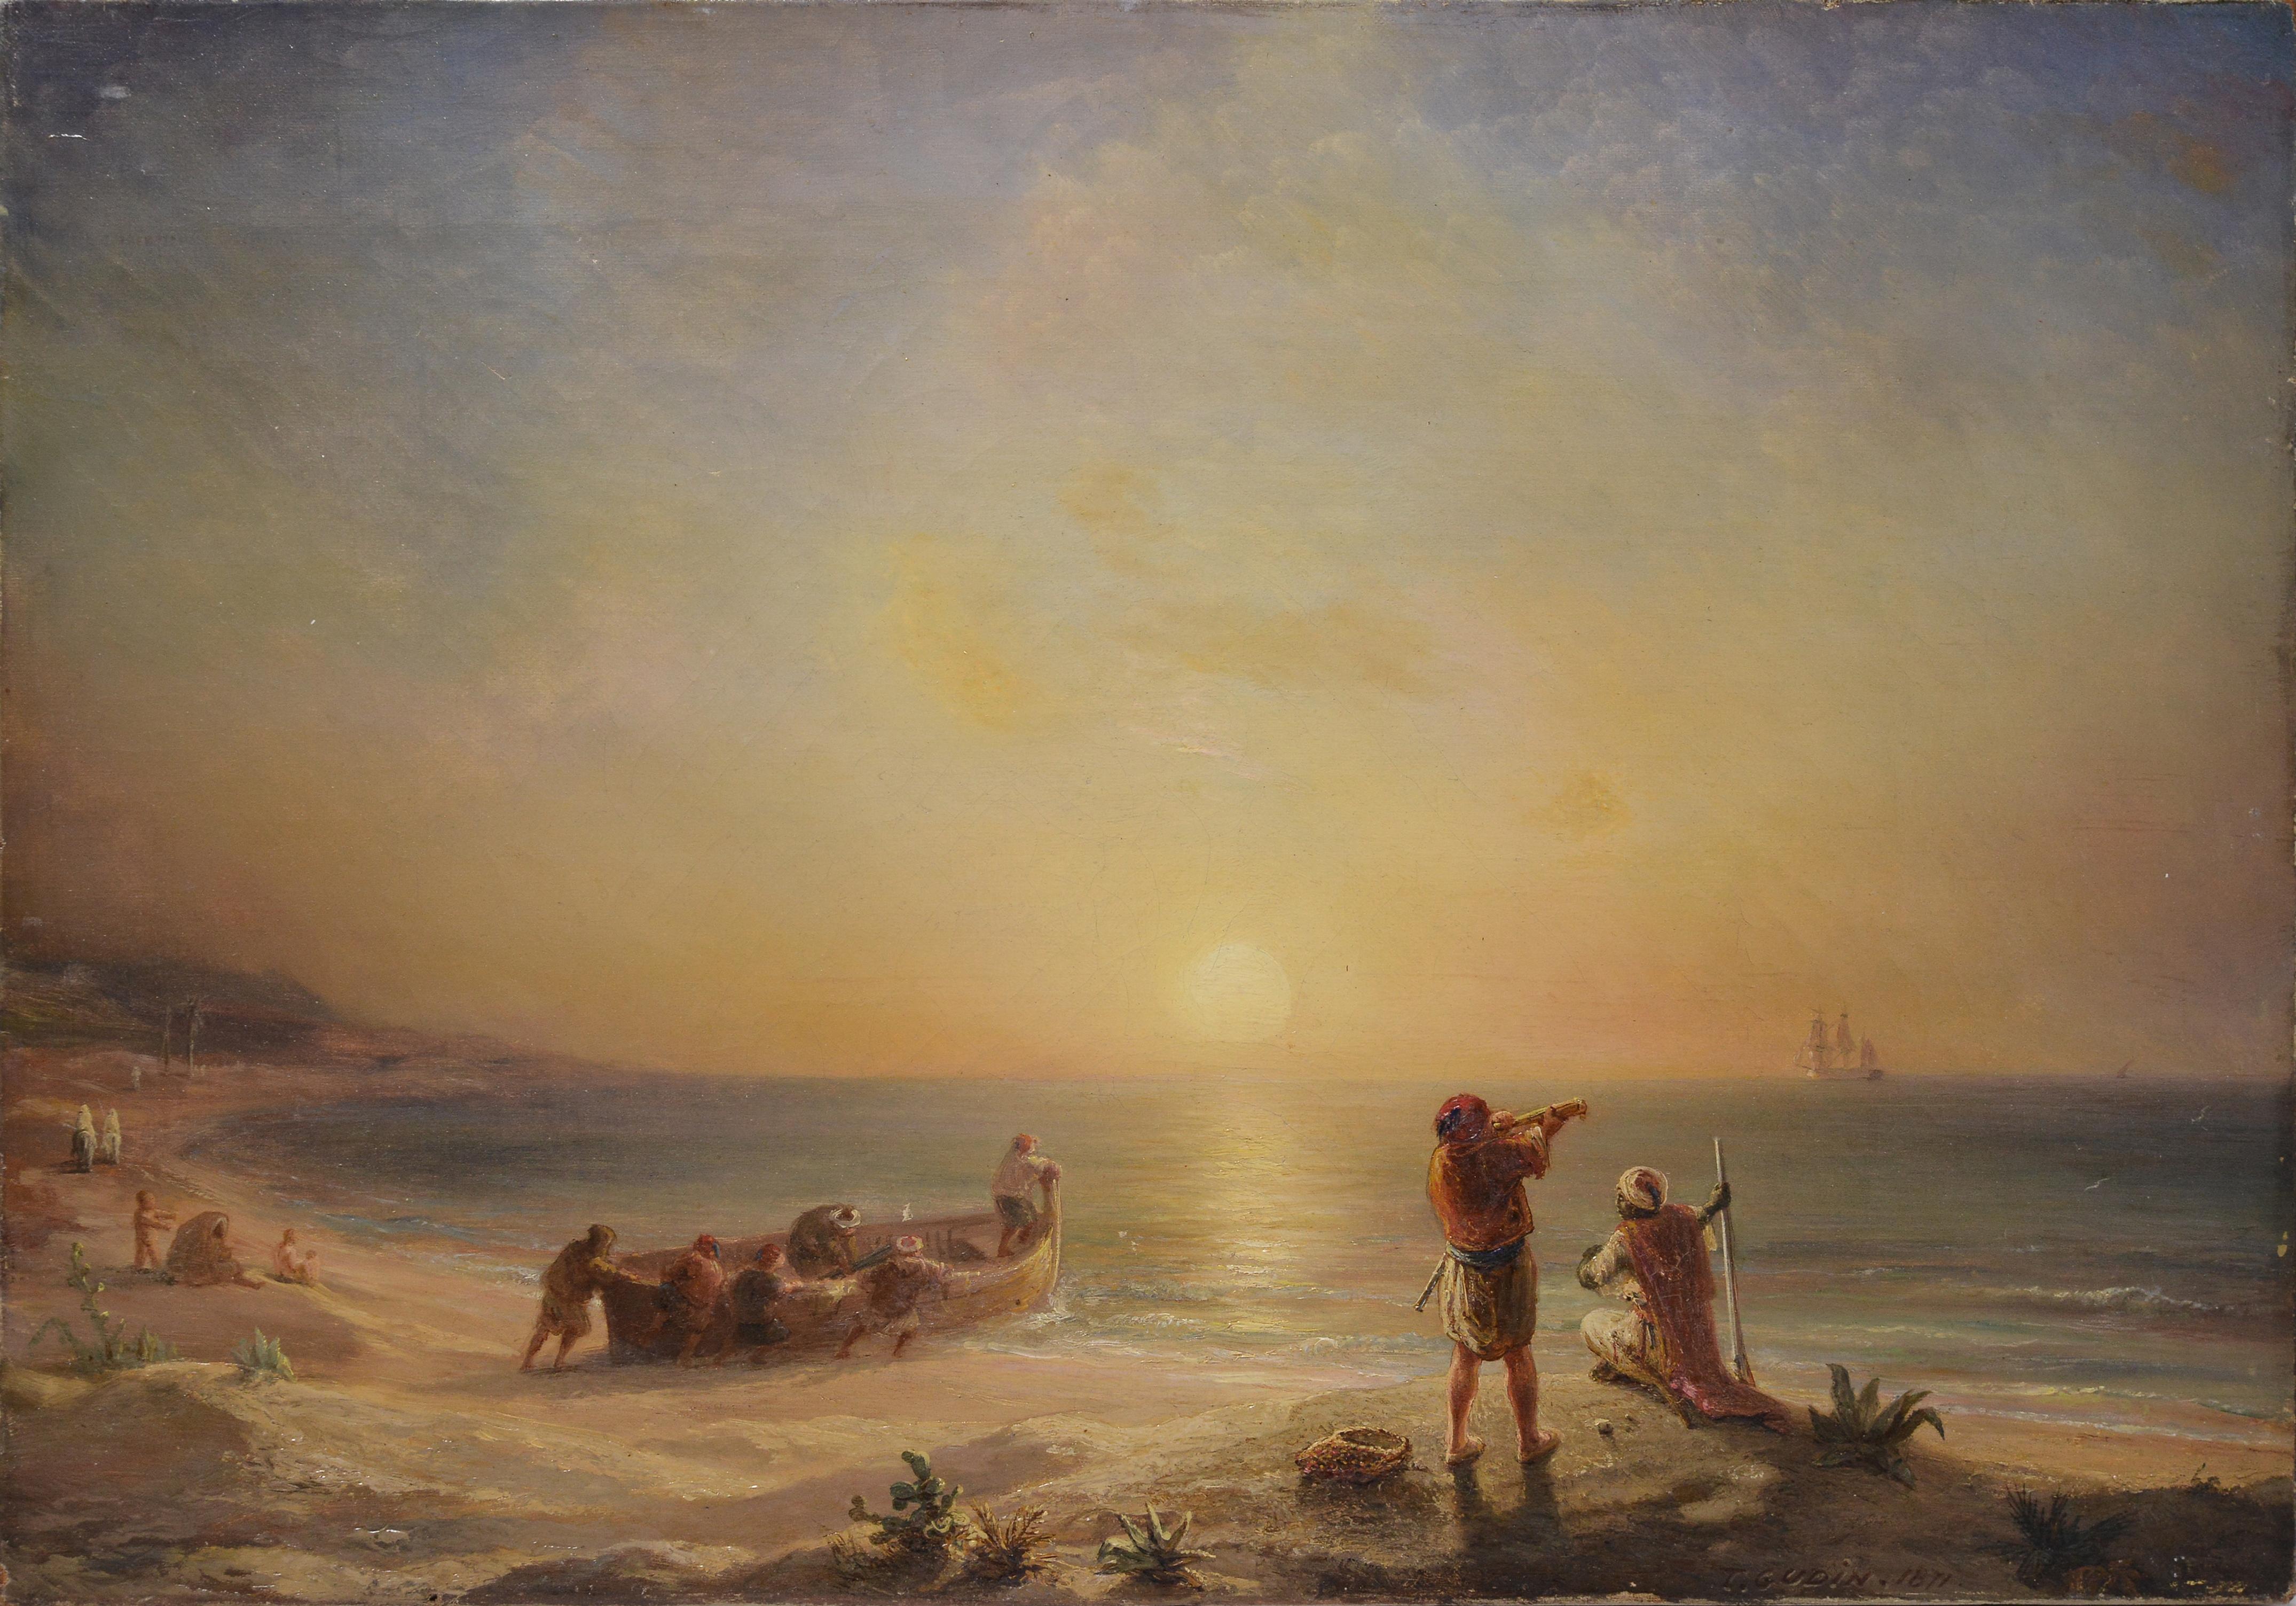 Smugglers at Algerian Coast 1871 Sunset Marine Scene Oil Painting by T. Gudin - Brown Landscape Painting by Jean Antoine Théodore Gudin